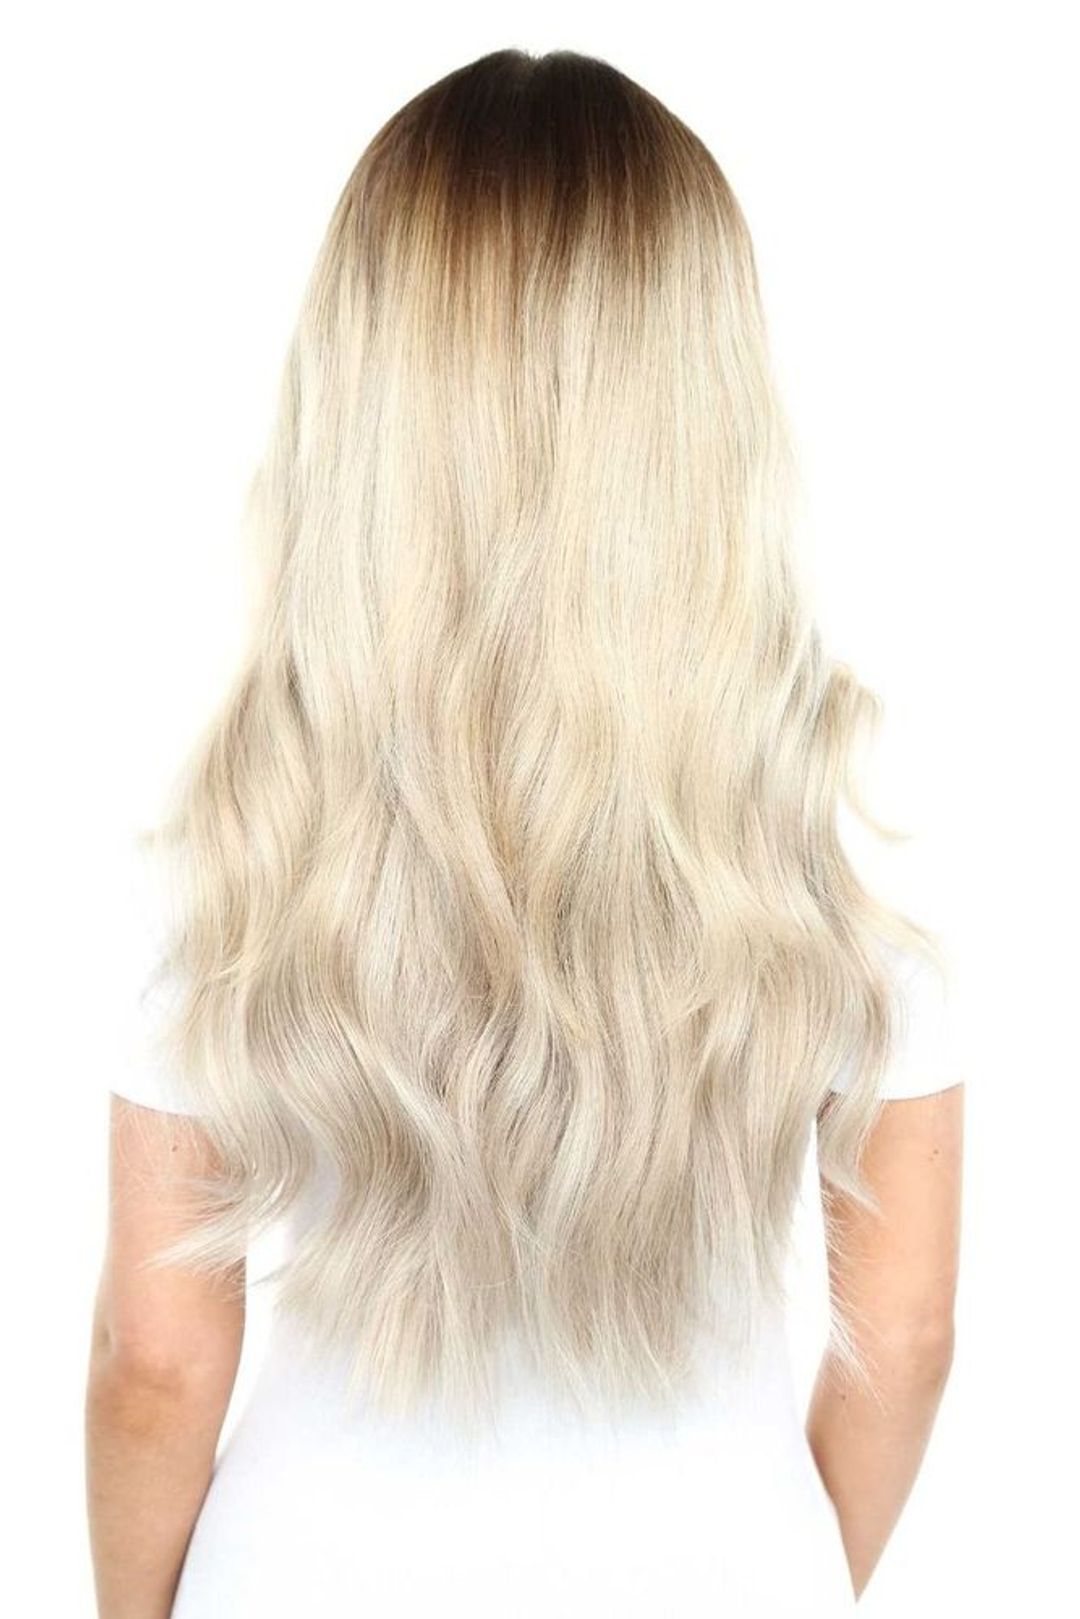 Beauty Works Gold Double Weft Extensions - Pure Platinum,22"